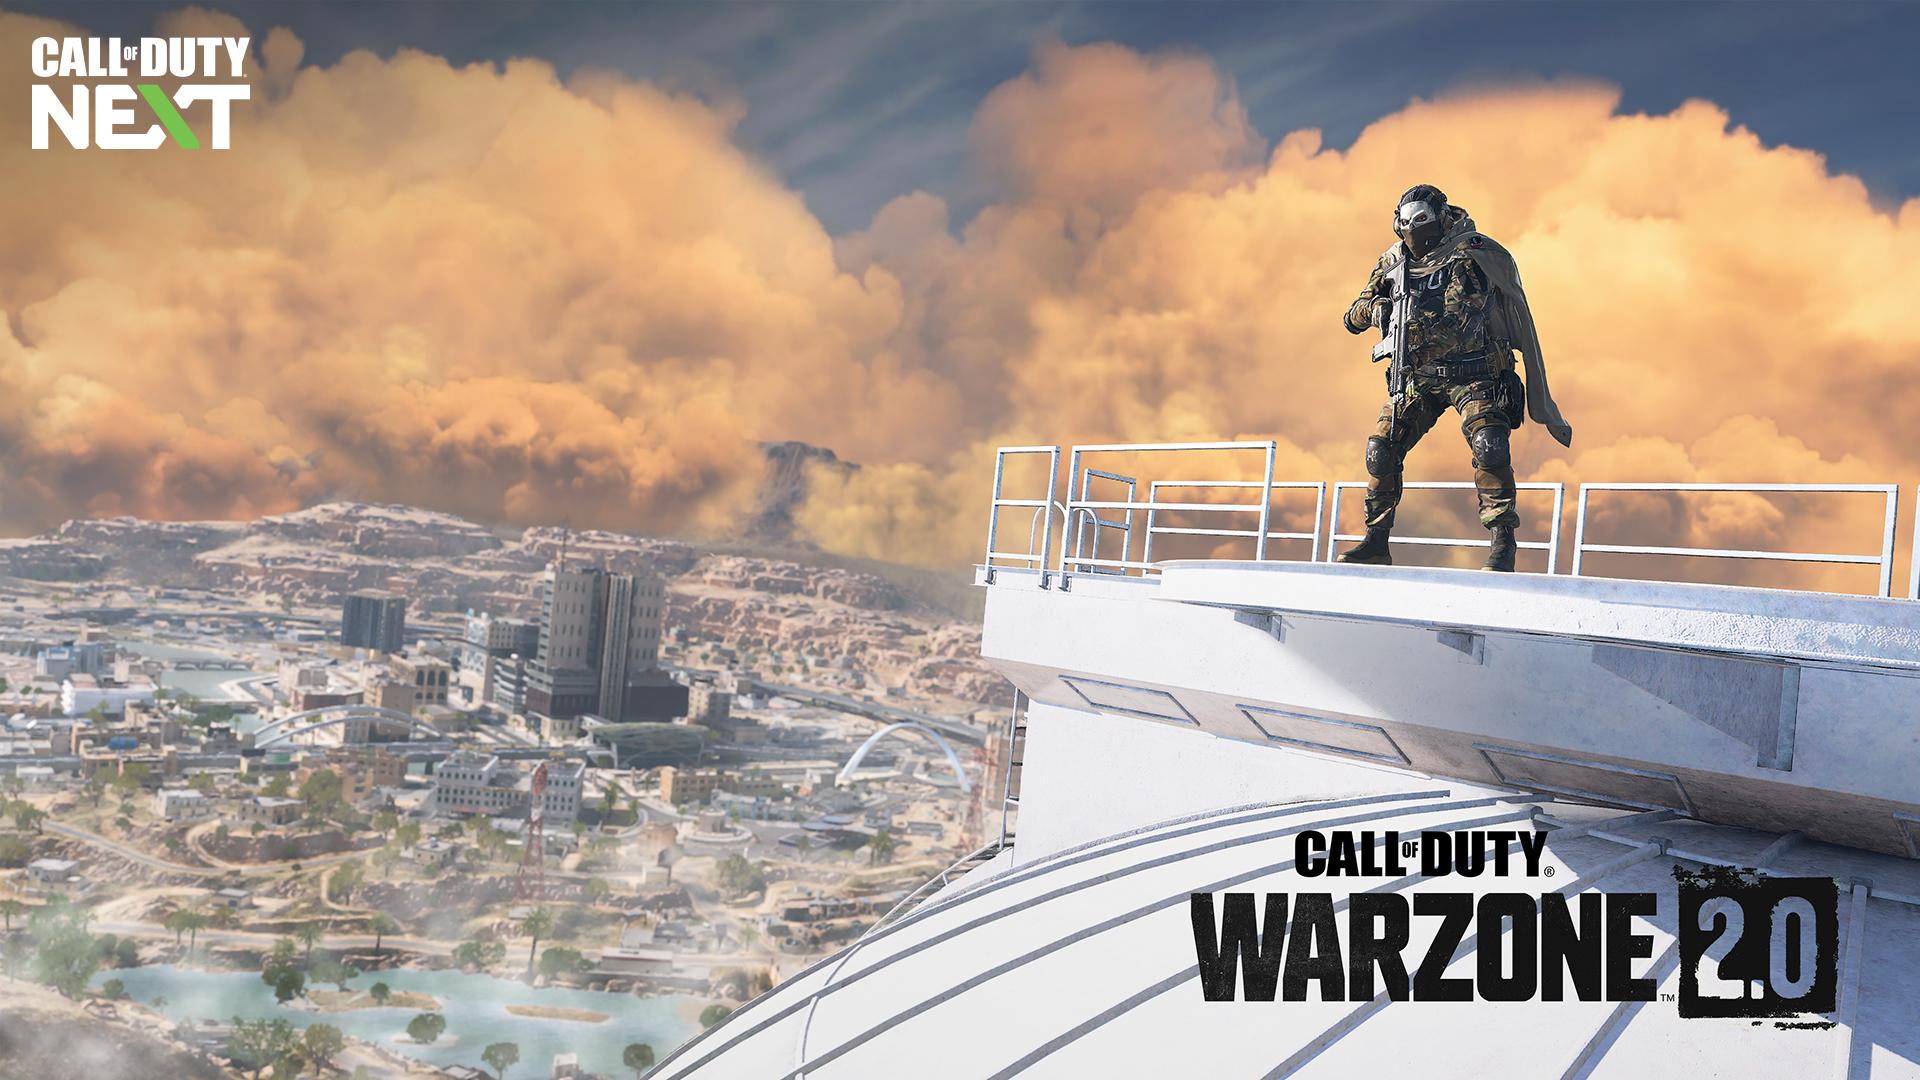 Call of Duty: Warzone 2.0 crosses 25 million players in just five days